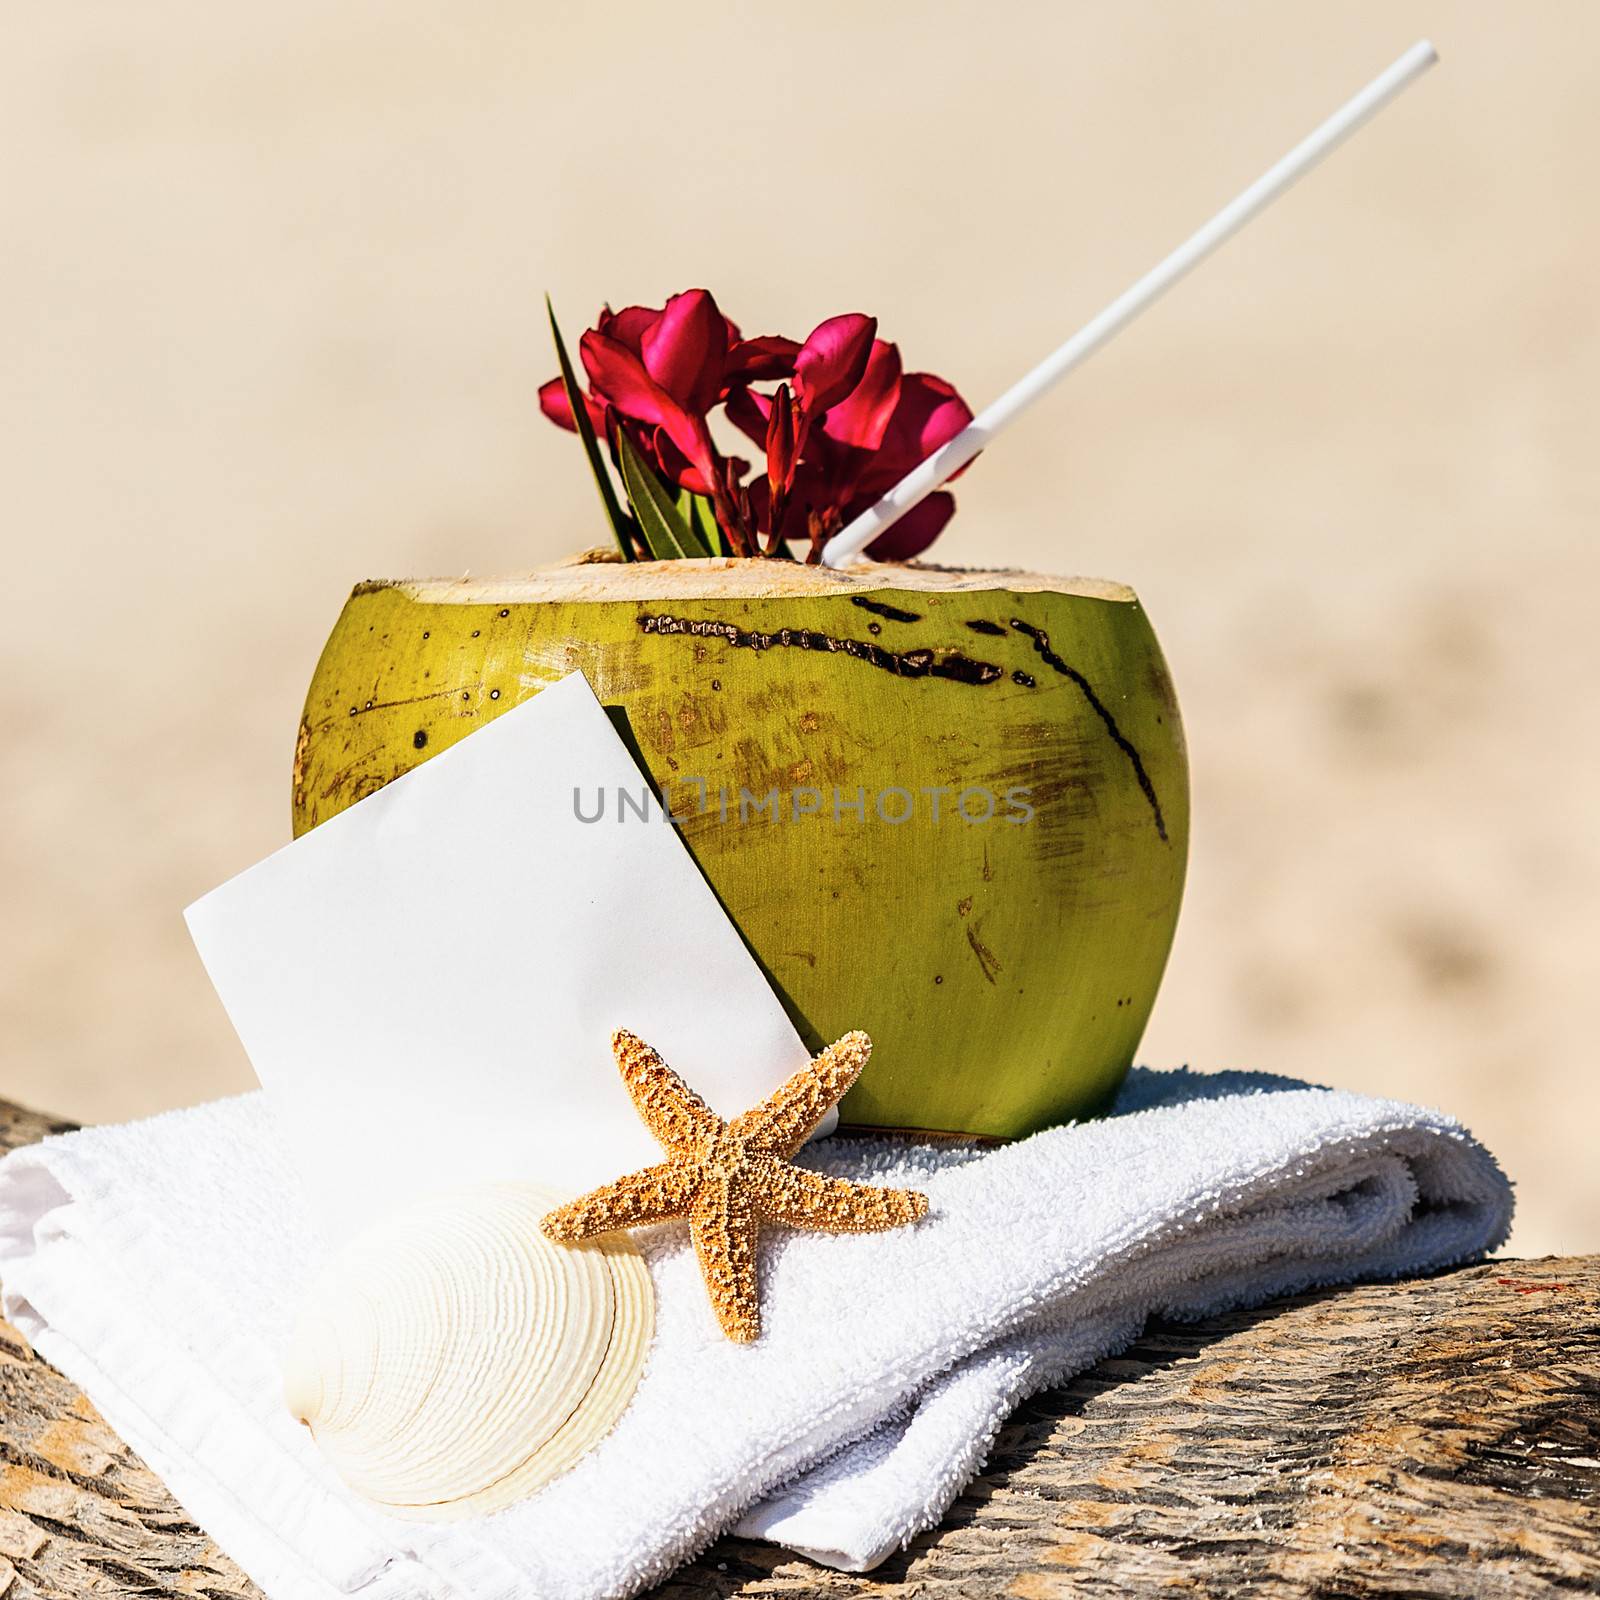 Coconut cocktail starfish tropical Caribbean beach refreshment and towel